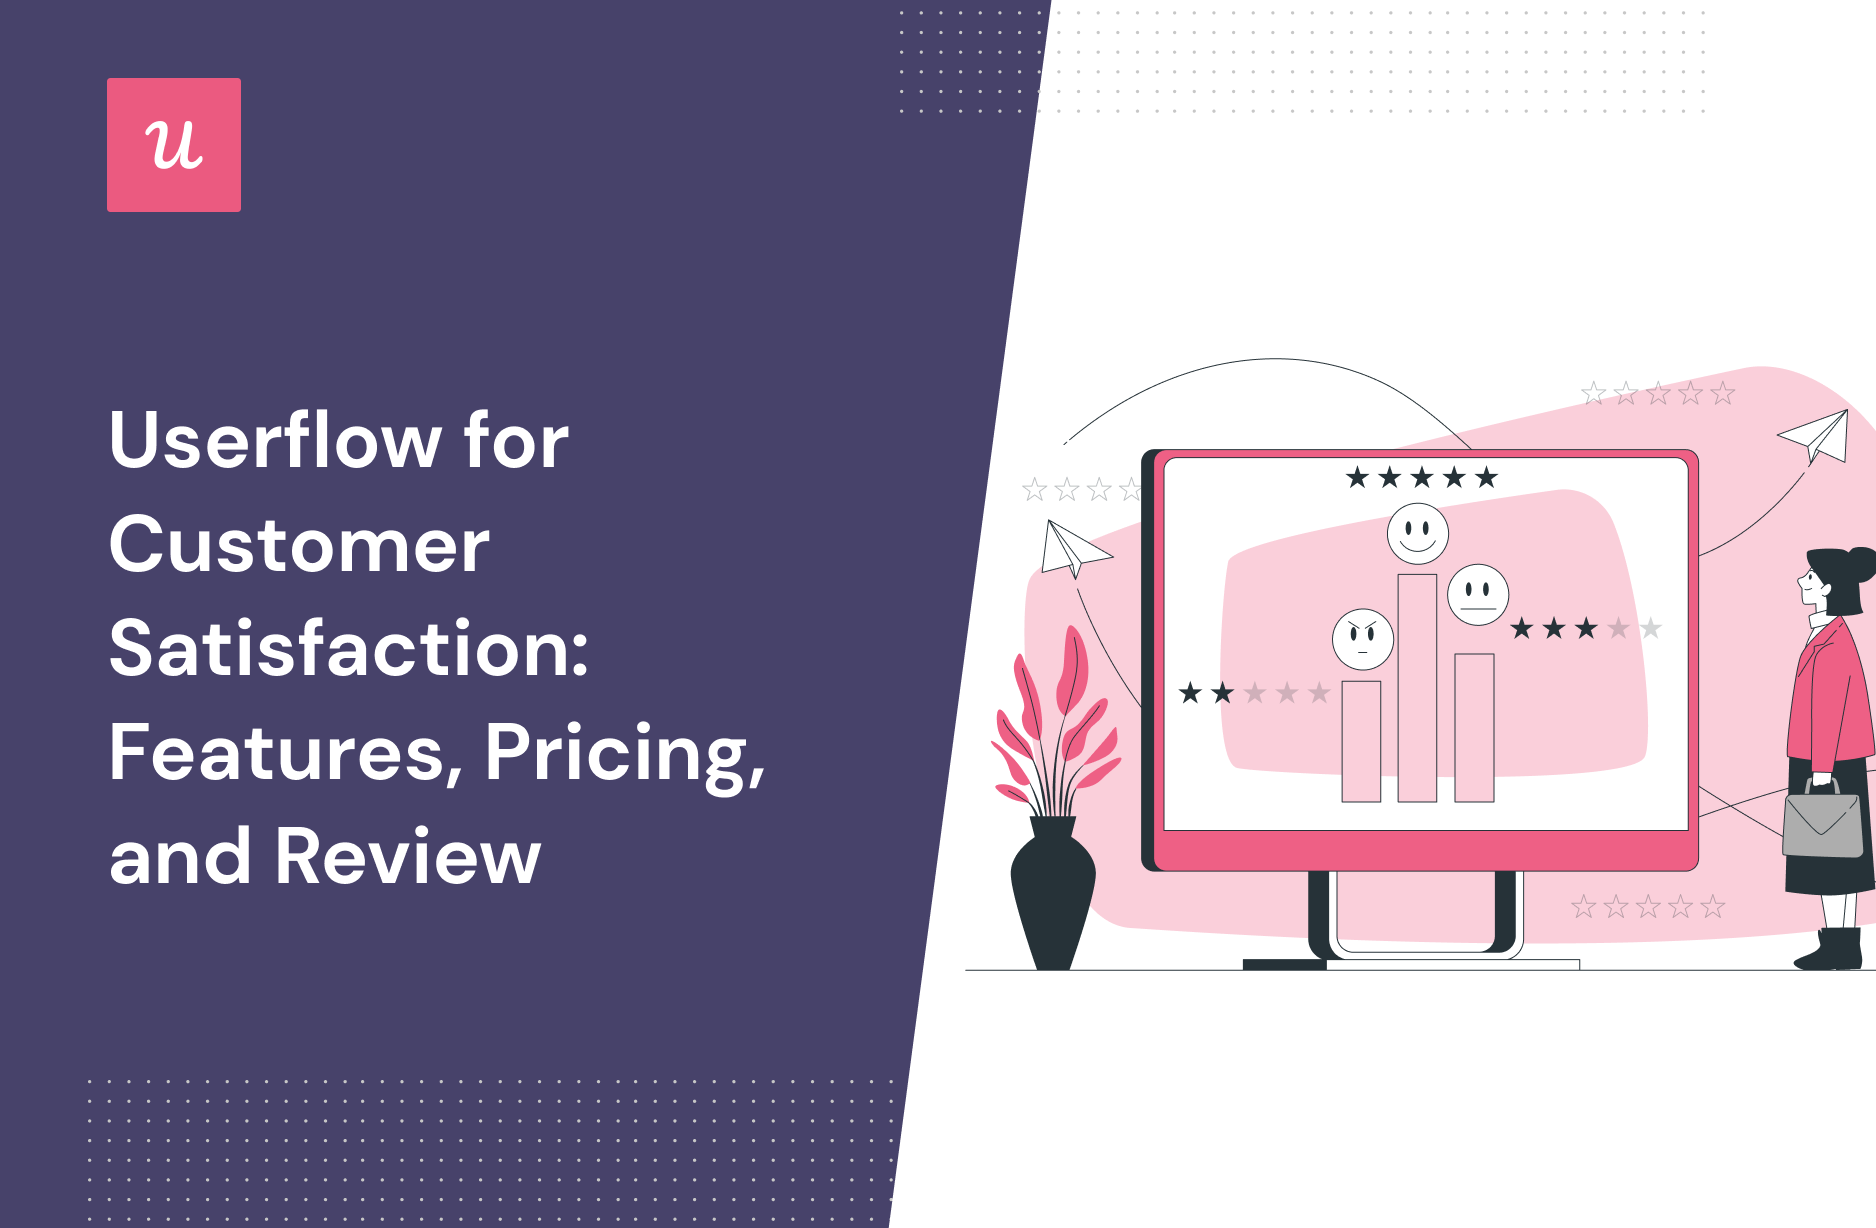 Userflow for Customer Satisfaction: Features, Pricing, and Review